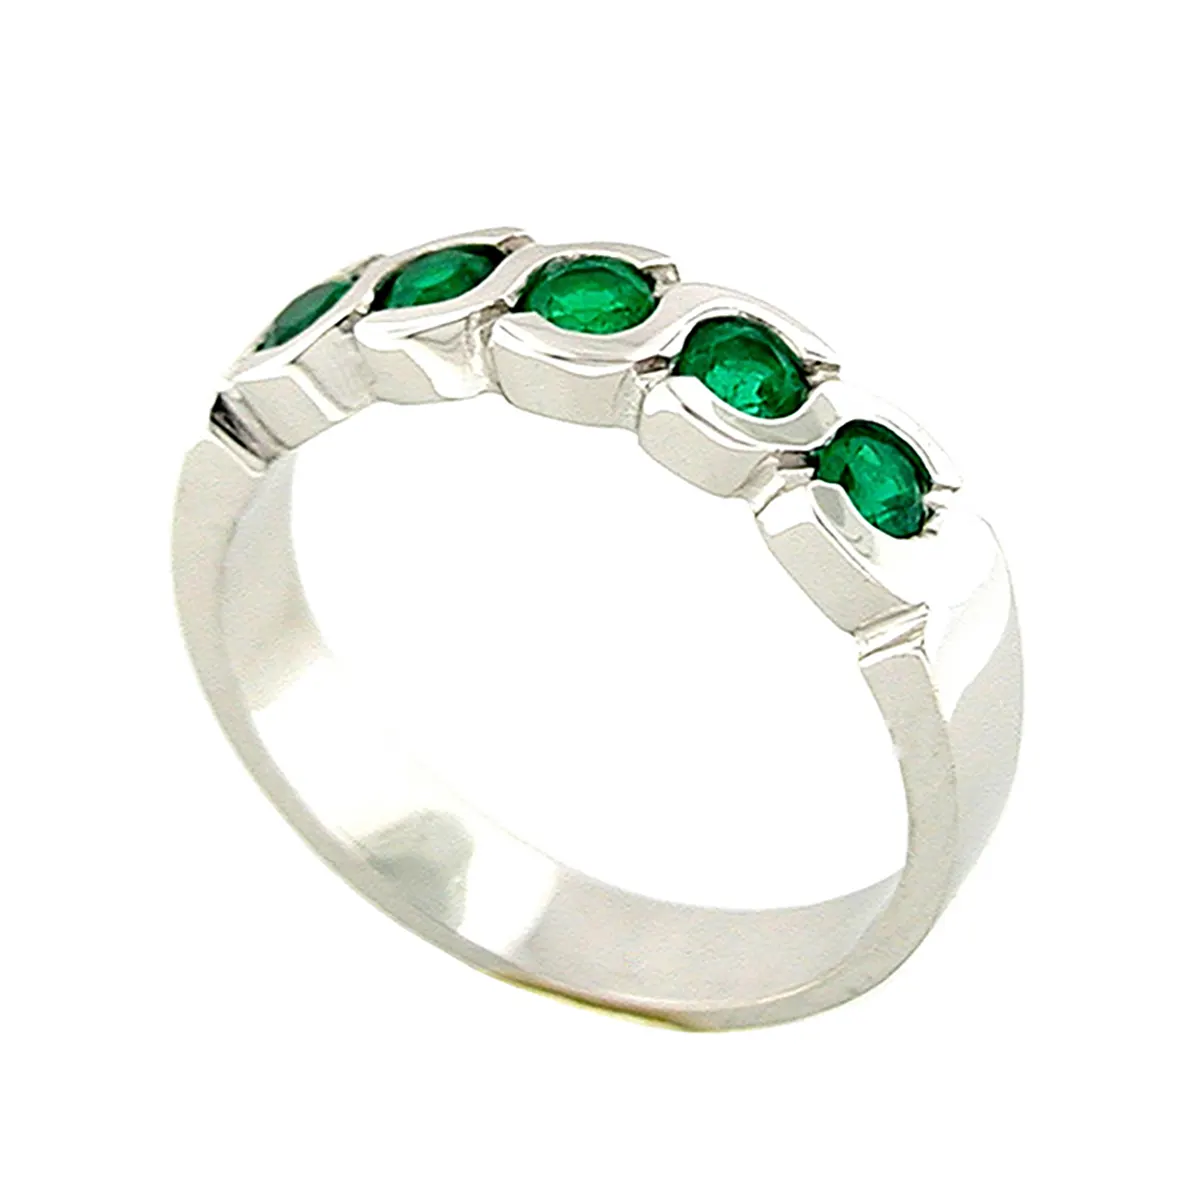 emerald-band-ring-with-round-cut-emeralds-set-in-18k-white-gold-bezel-setting